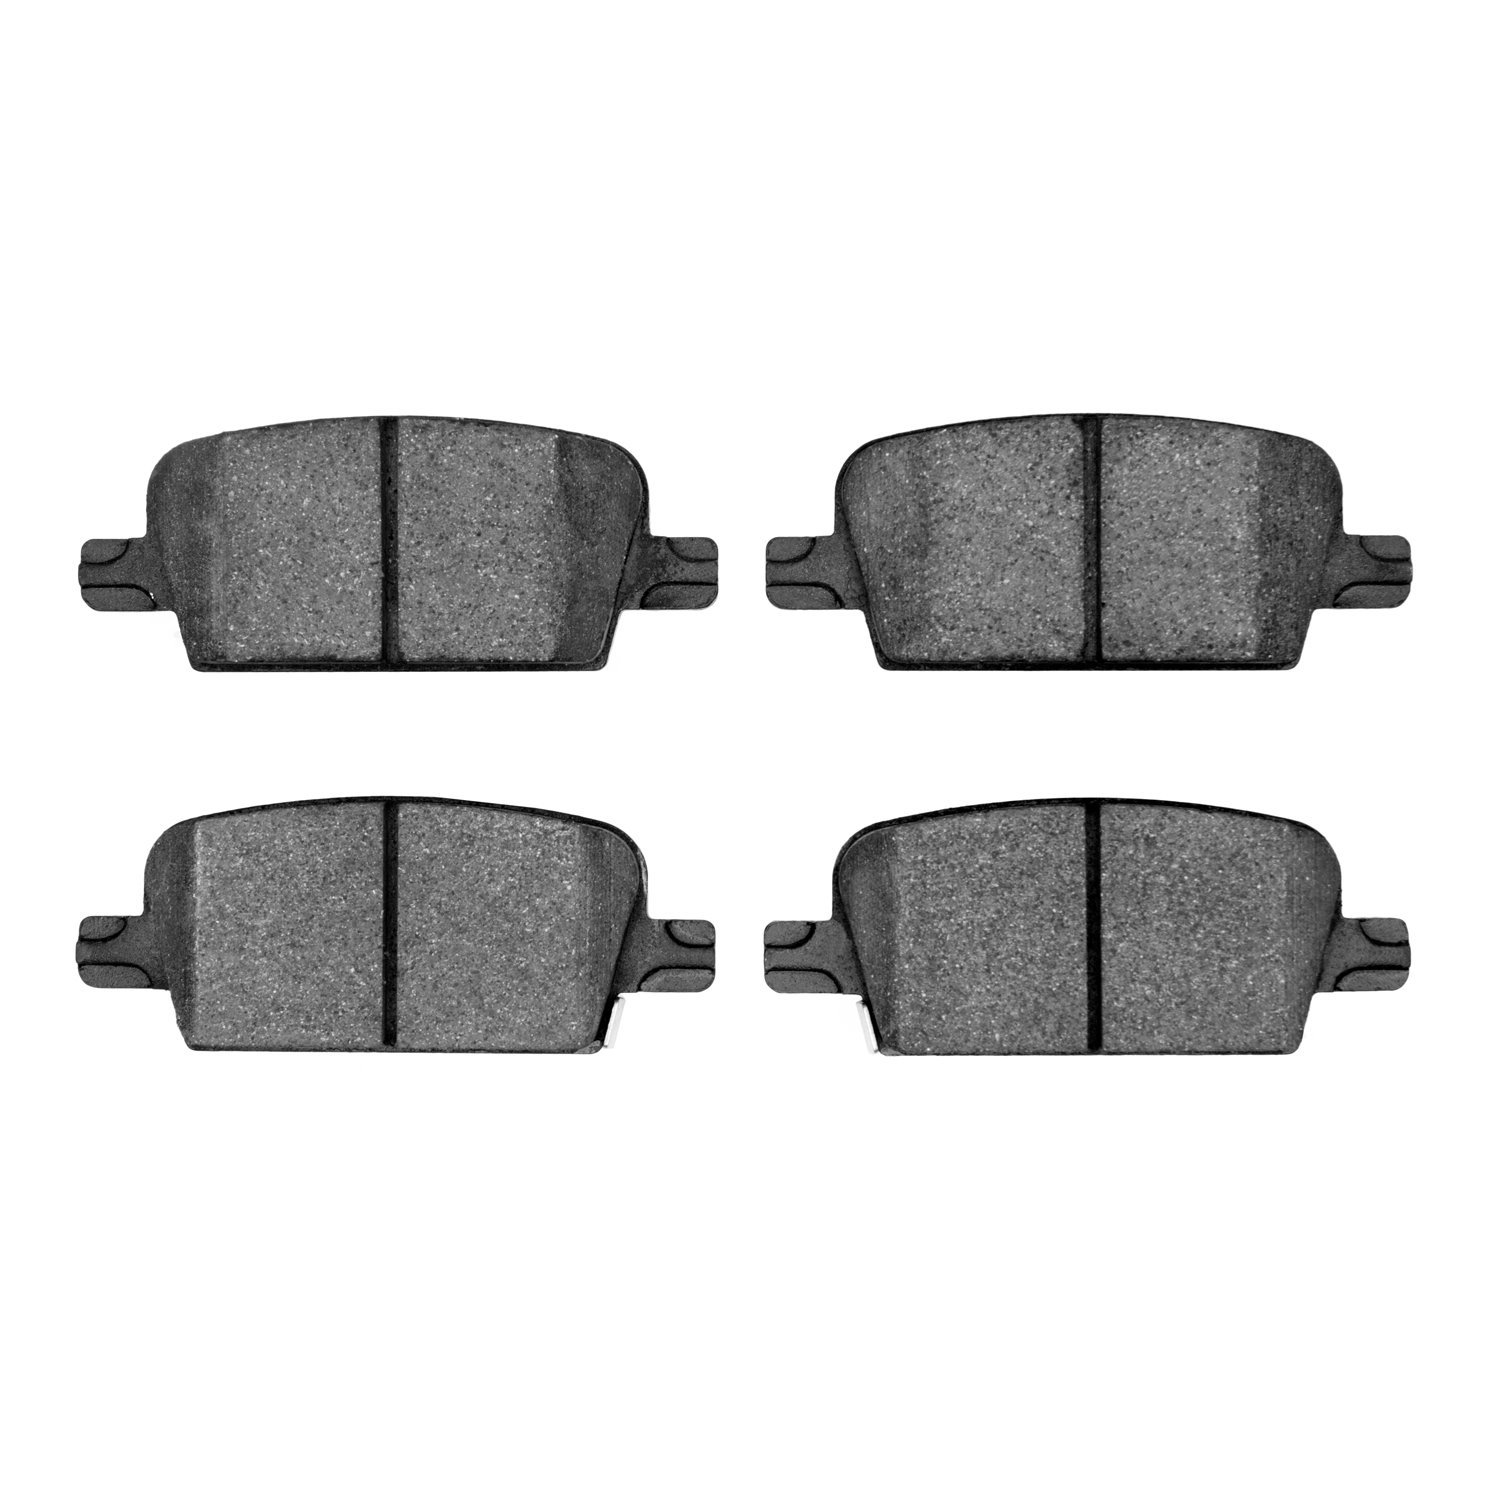 1310-1921-00 3000-Series Ceramic Brake Pads, Fits Select GM, Position: Rear